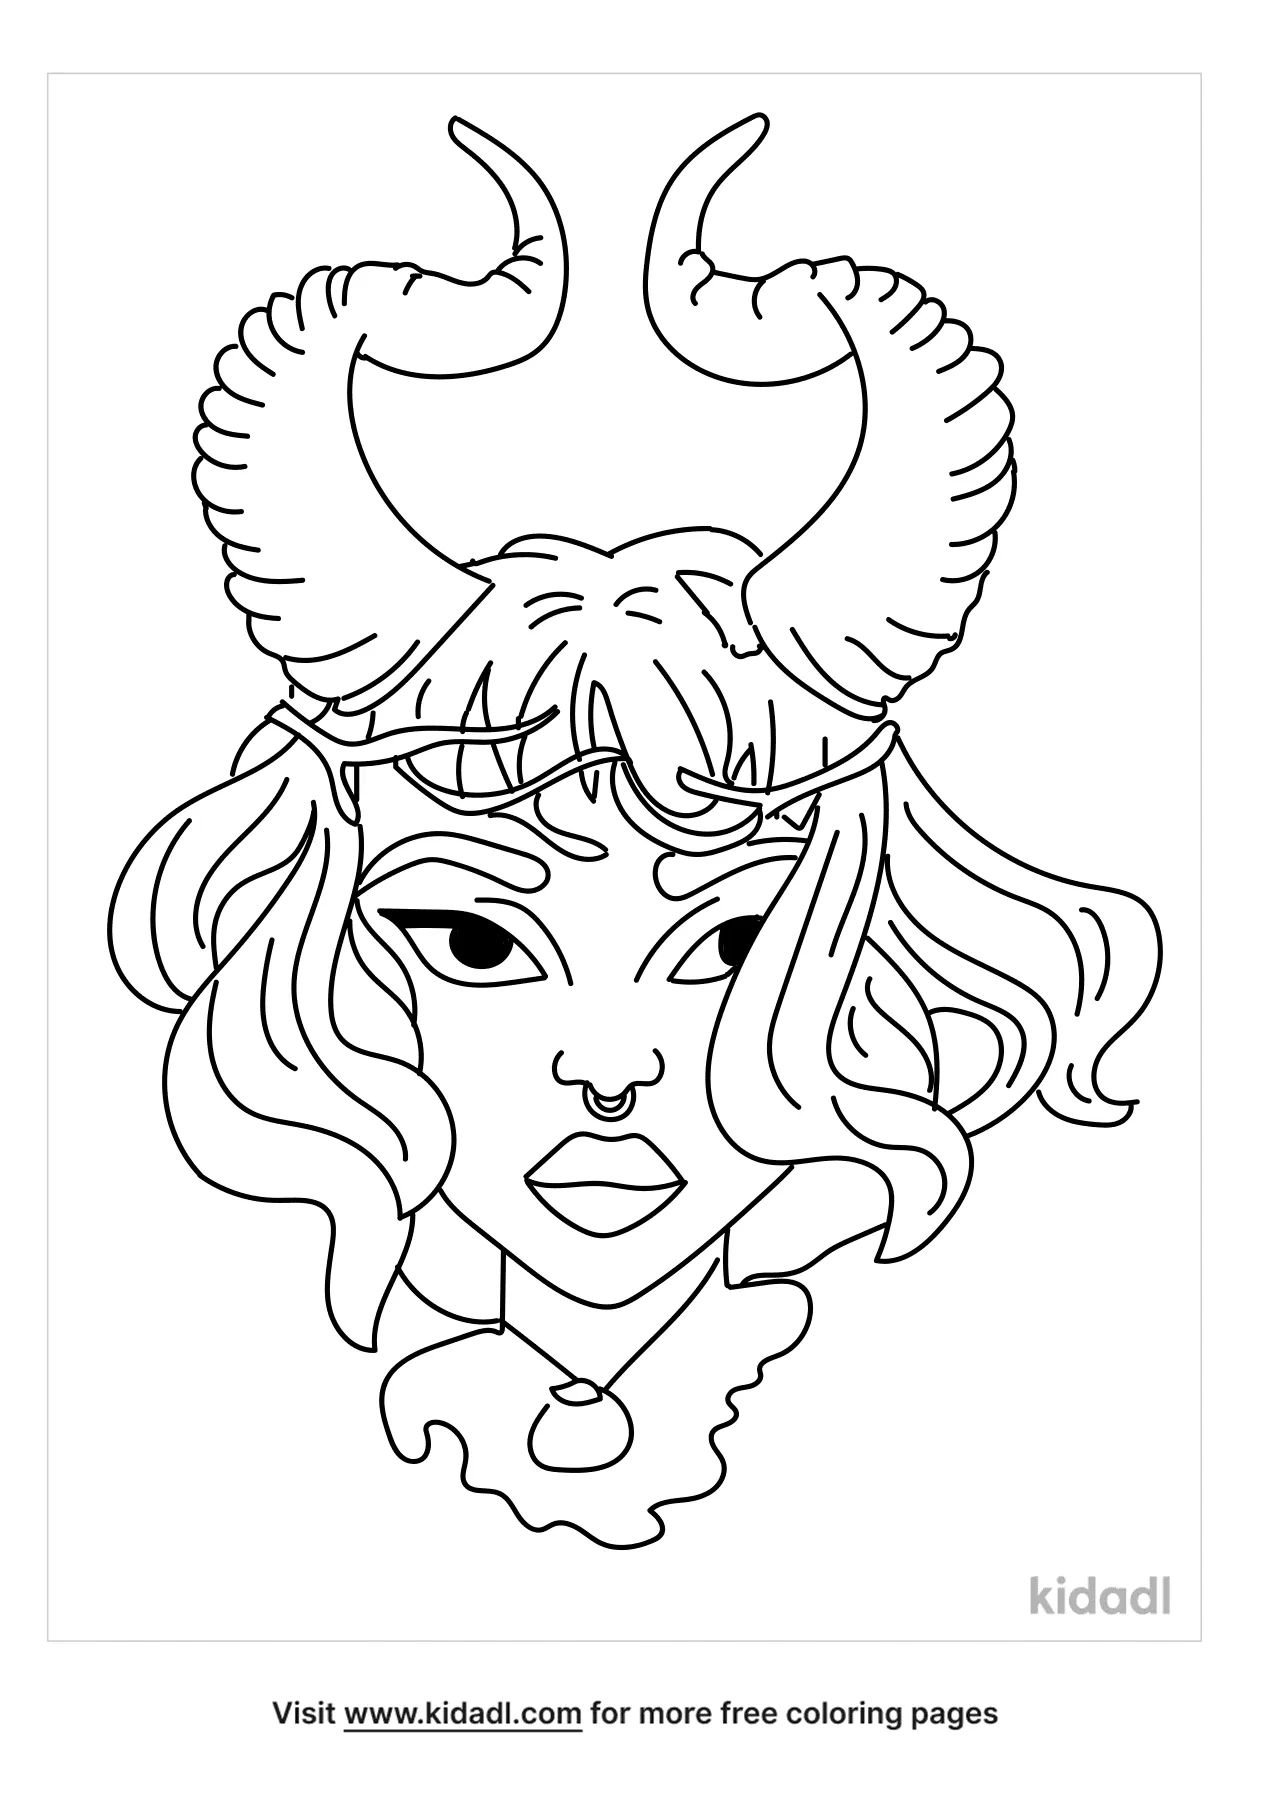 Free Horns Girl Coloring Page | Coloring Page Printables | Kidadl